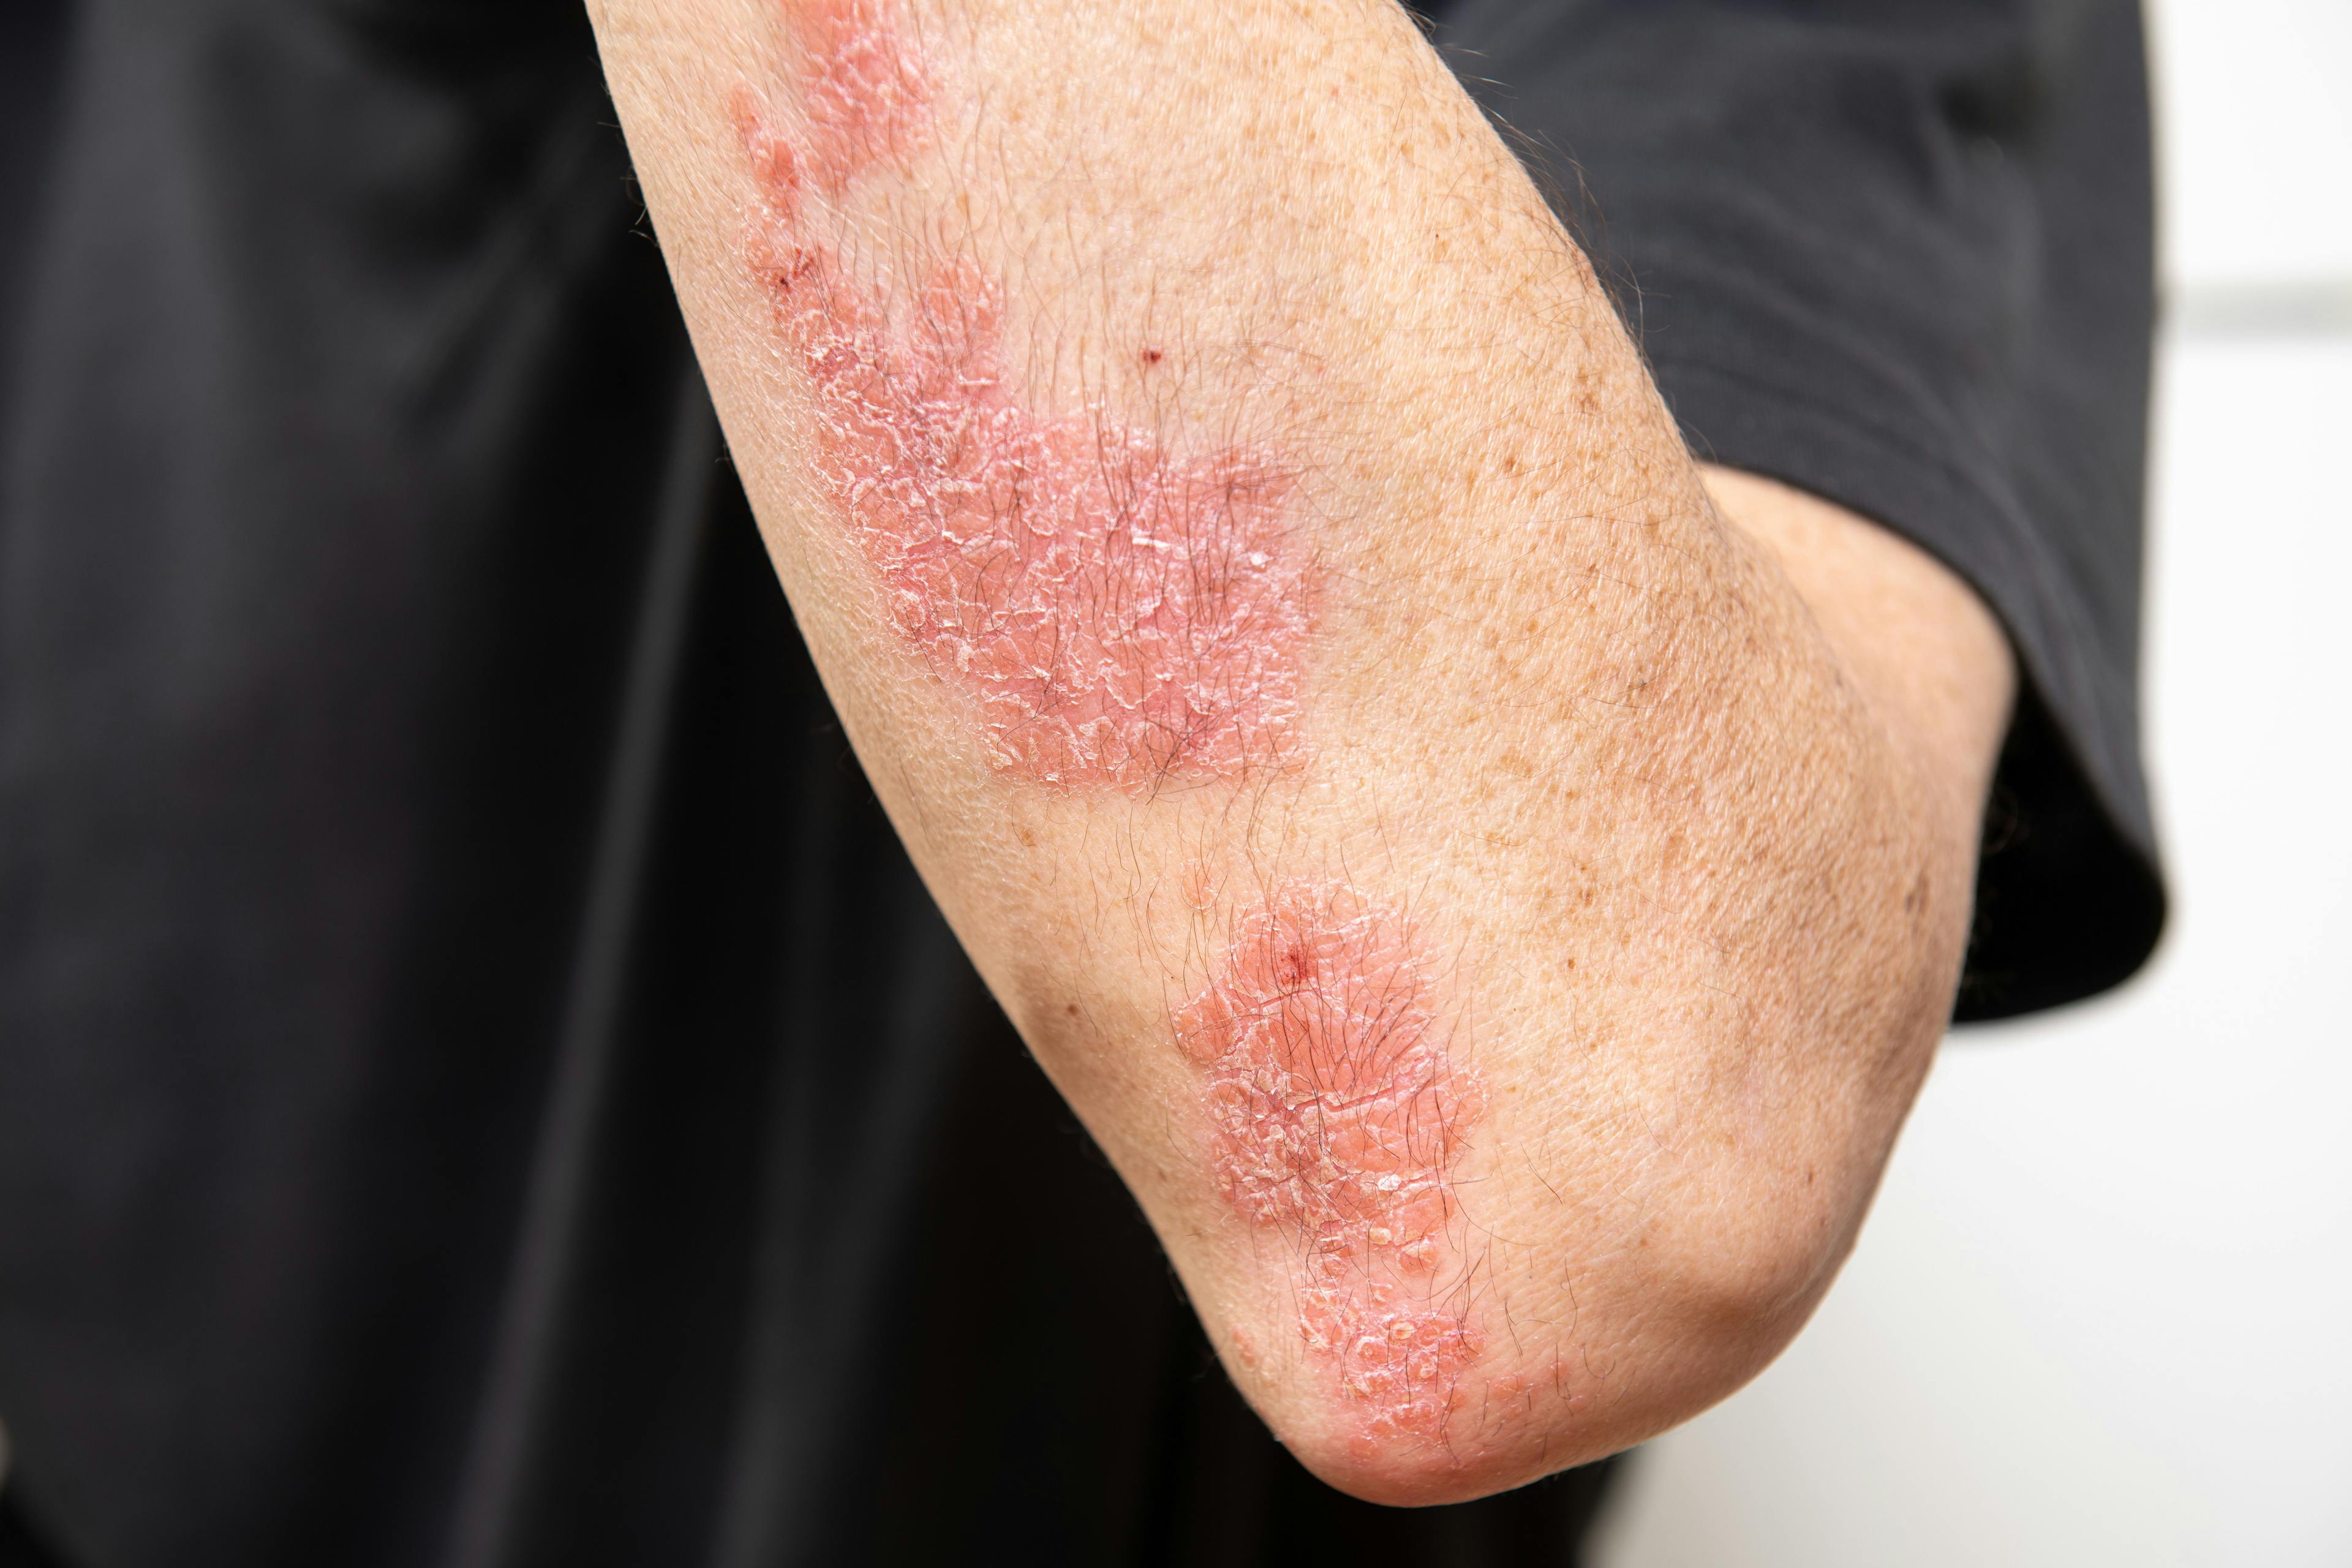 High Levels of Cholesterol, Low-Density Lipoprotein Cholesterol, Among Genetic Risk Factors for Psoriasis